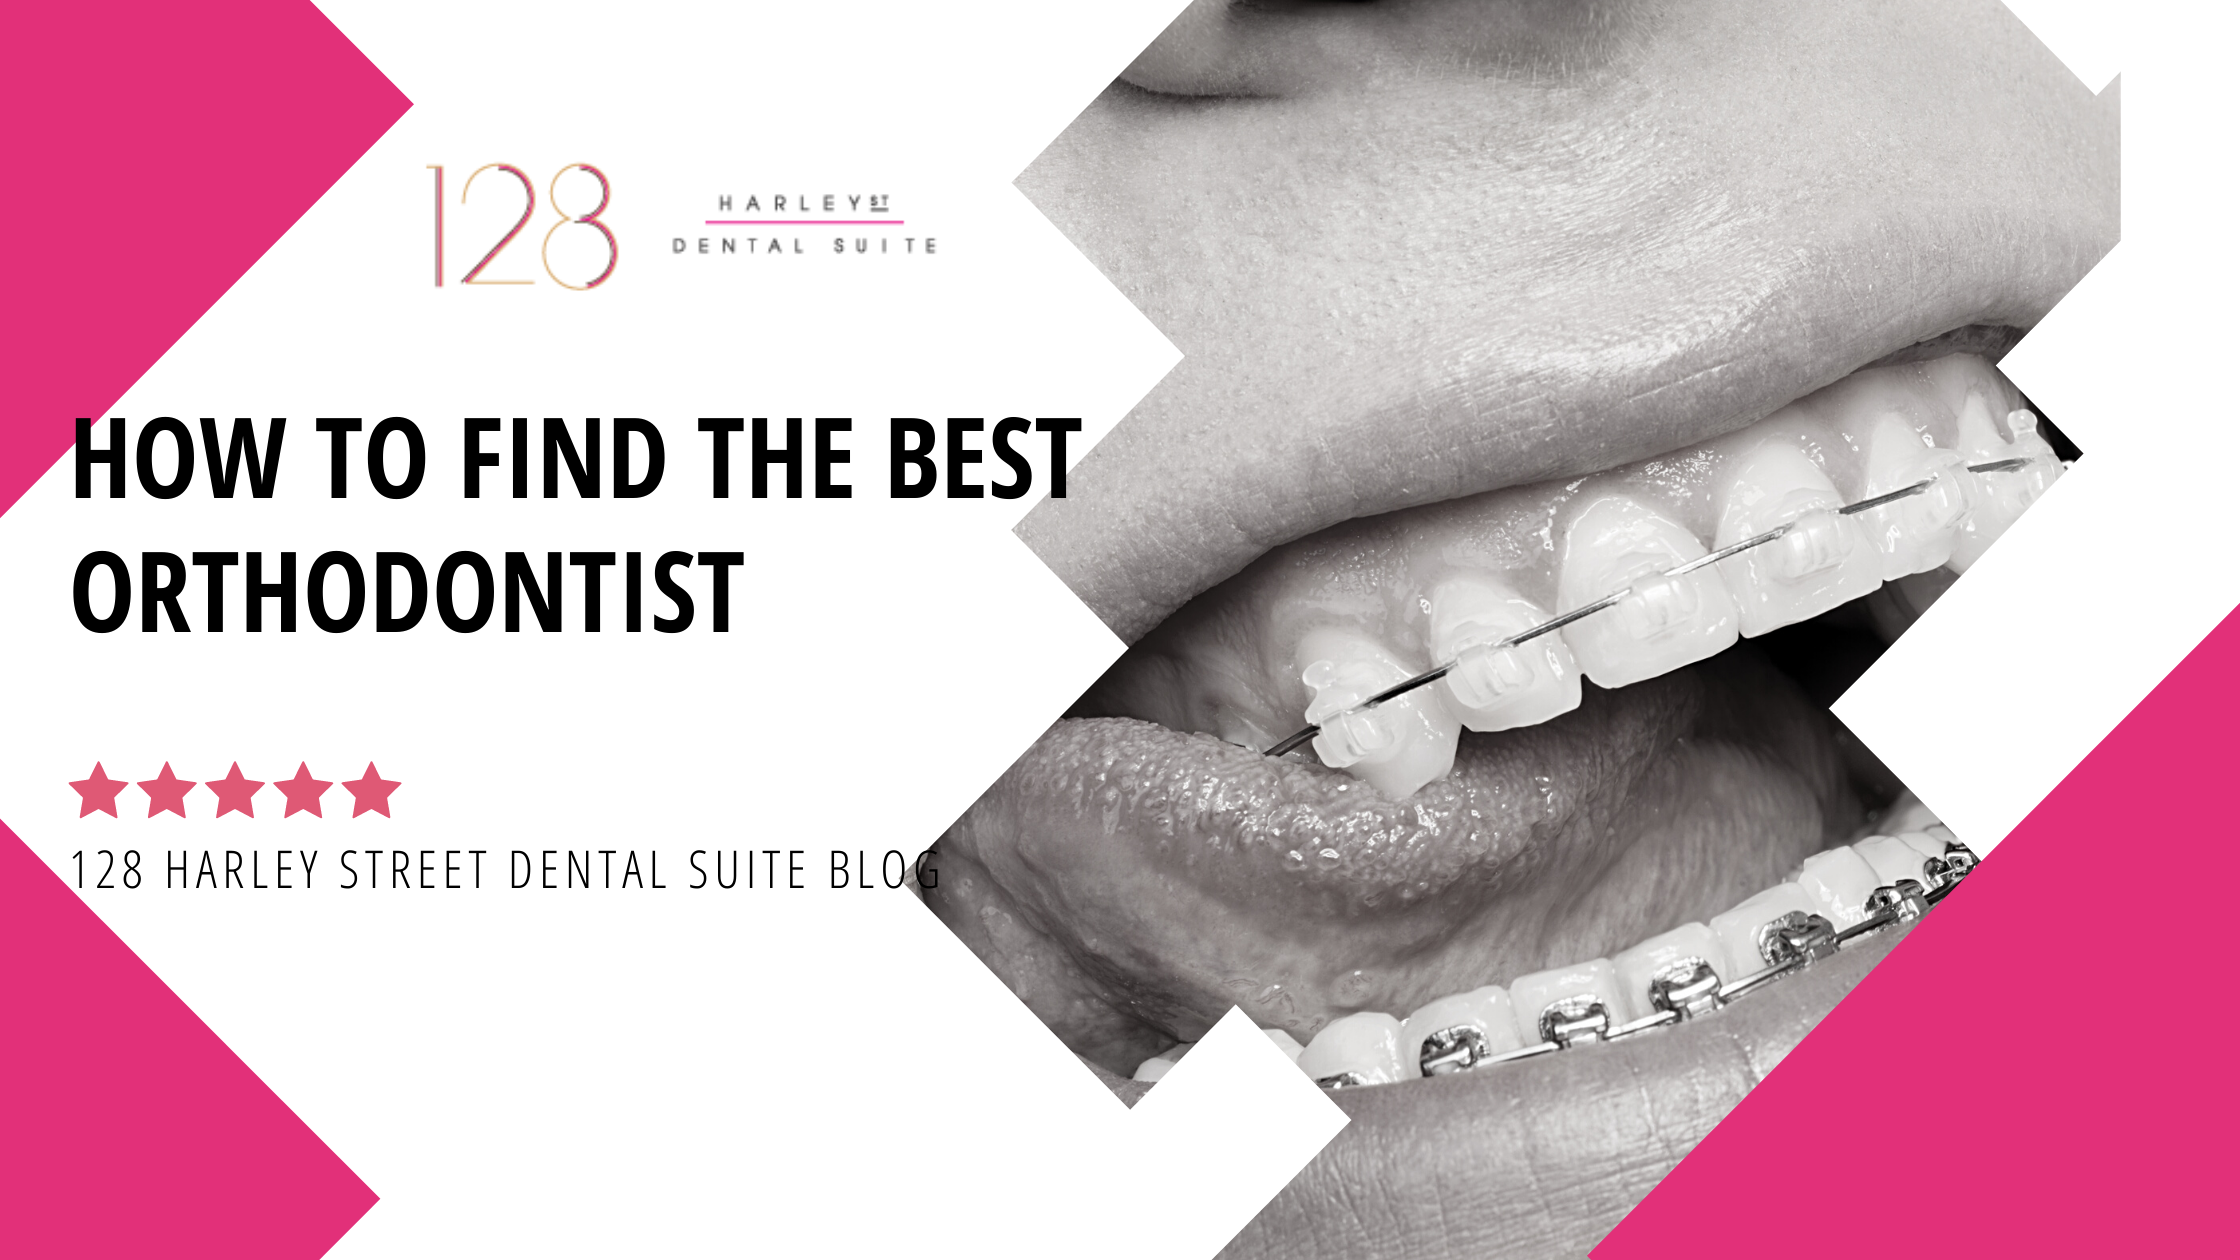 How to Find the Best Orthodontist